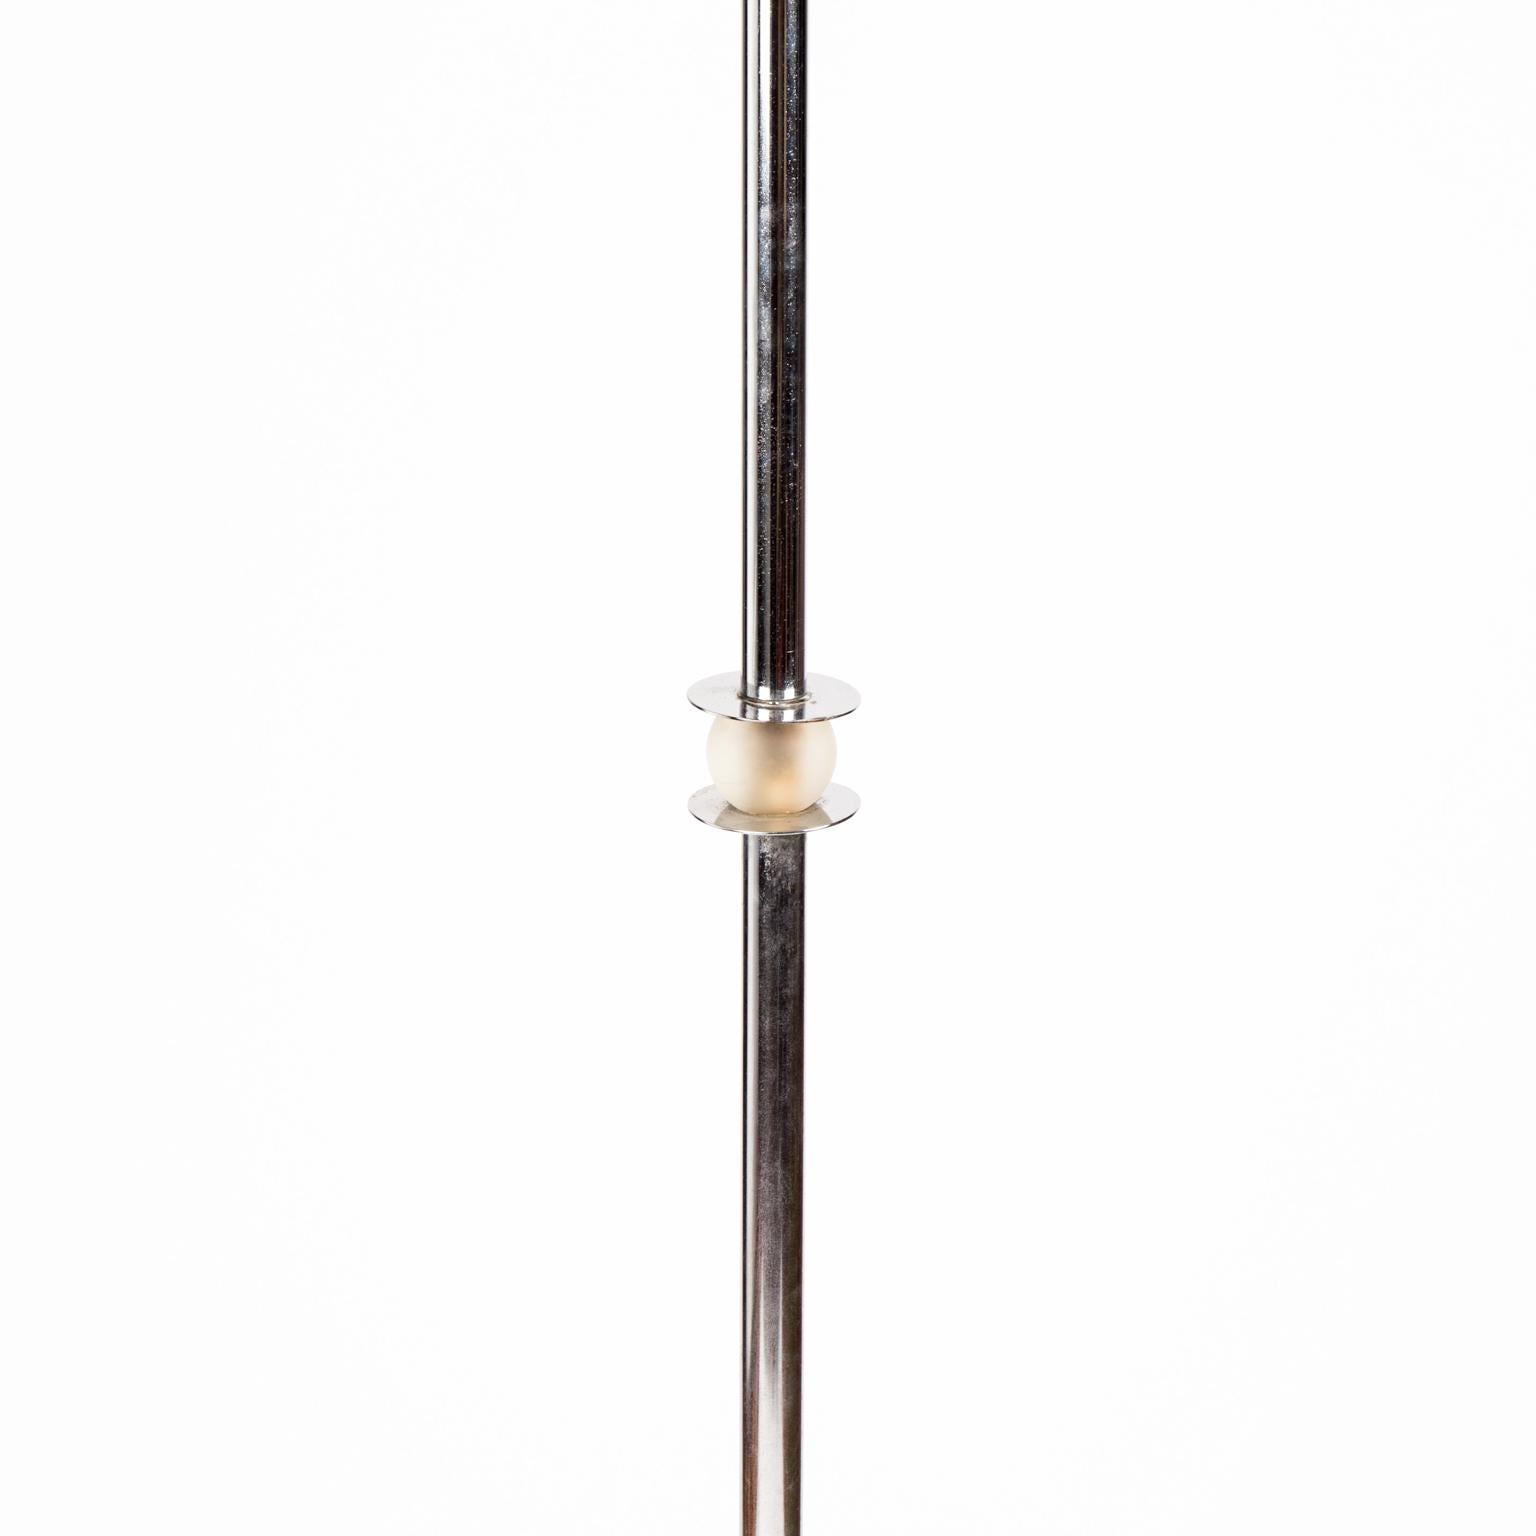 Machine age chrome floor lamp with beautiful detailing including glass insert and chrome speed rings throughout. Very heavy...Probably used in a commercial setting. A stand alone piece that would add charm and chic to any setting.


